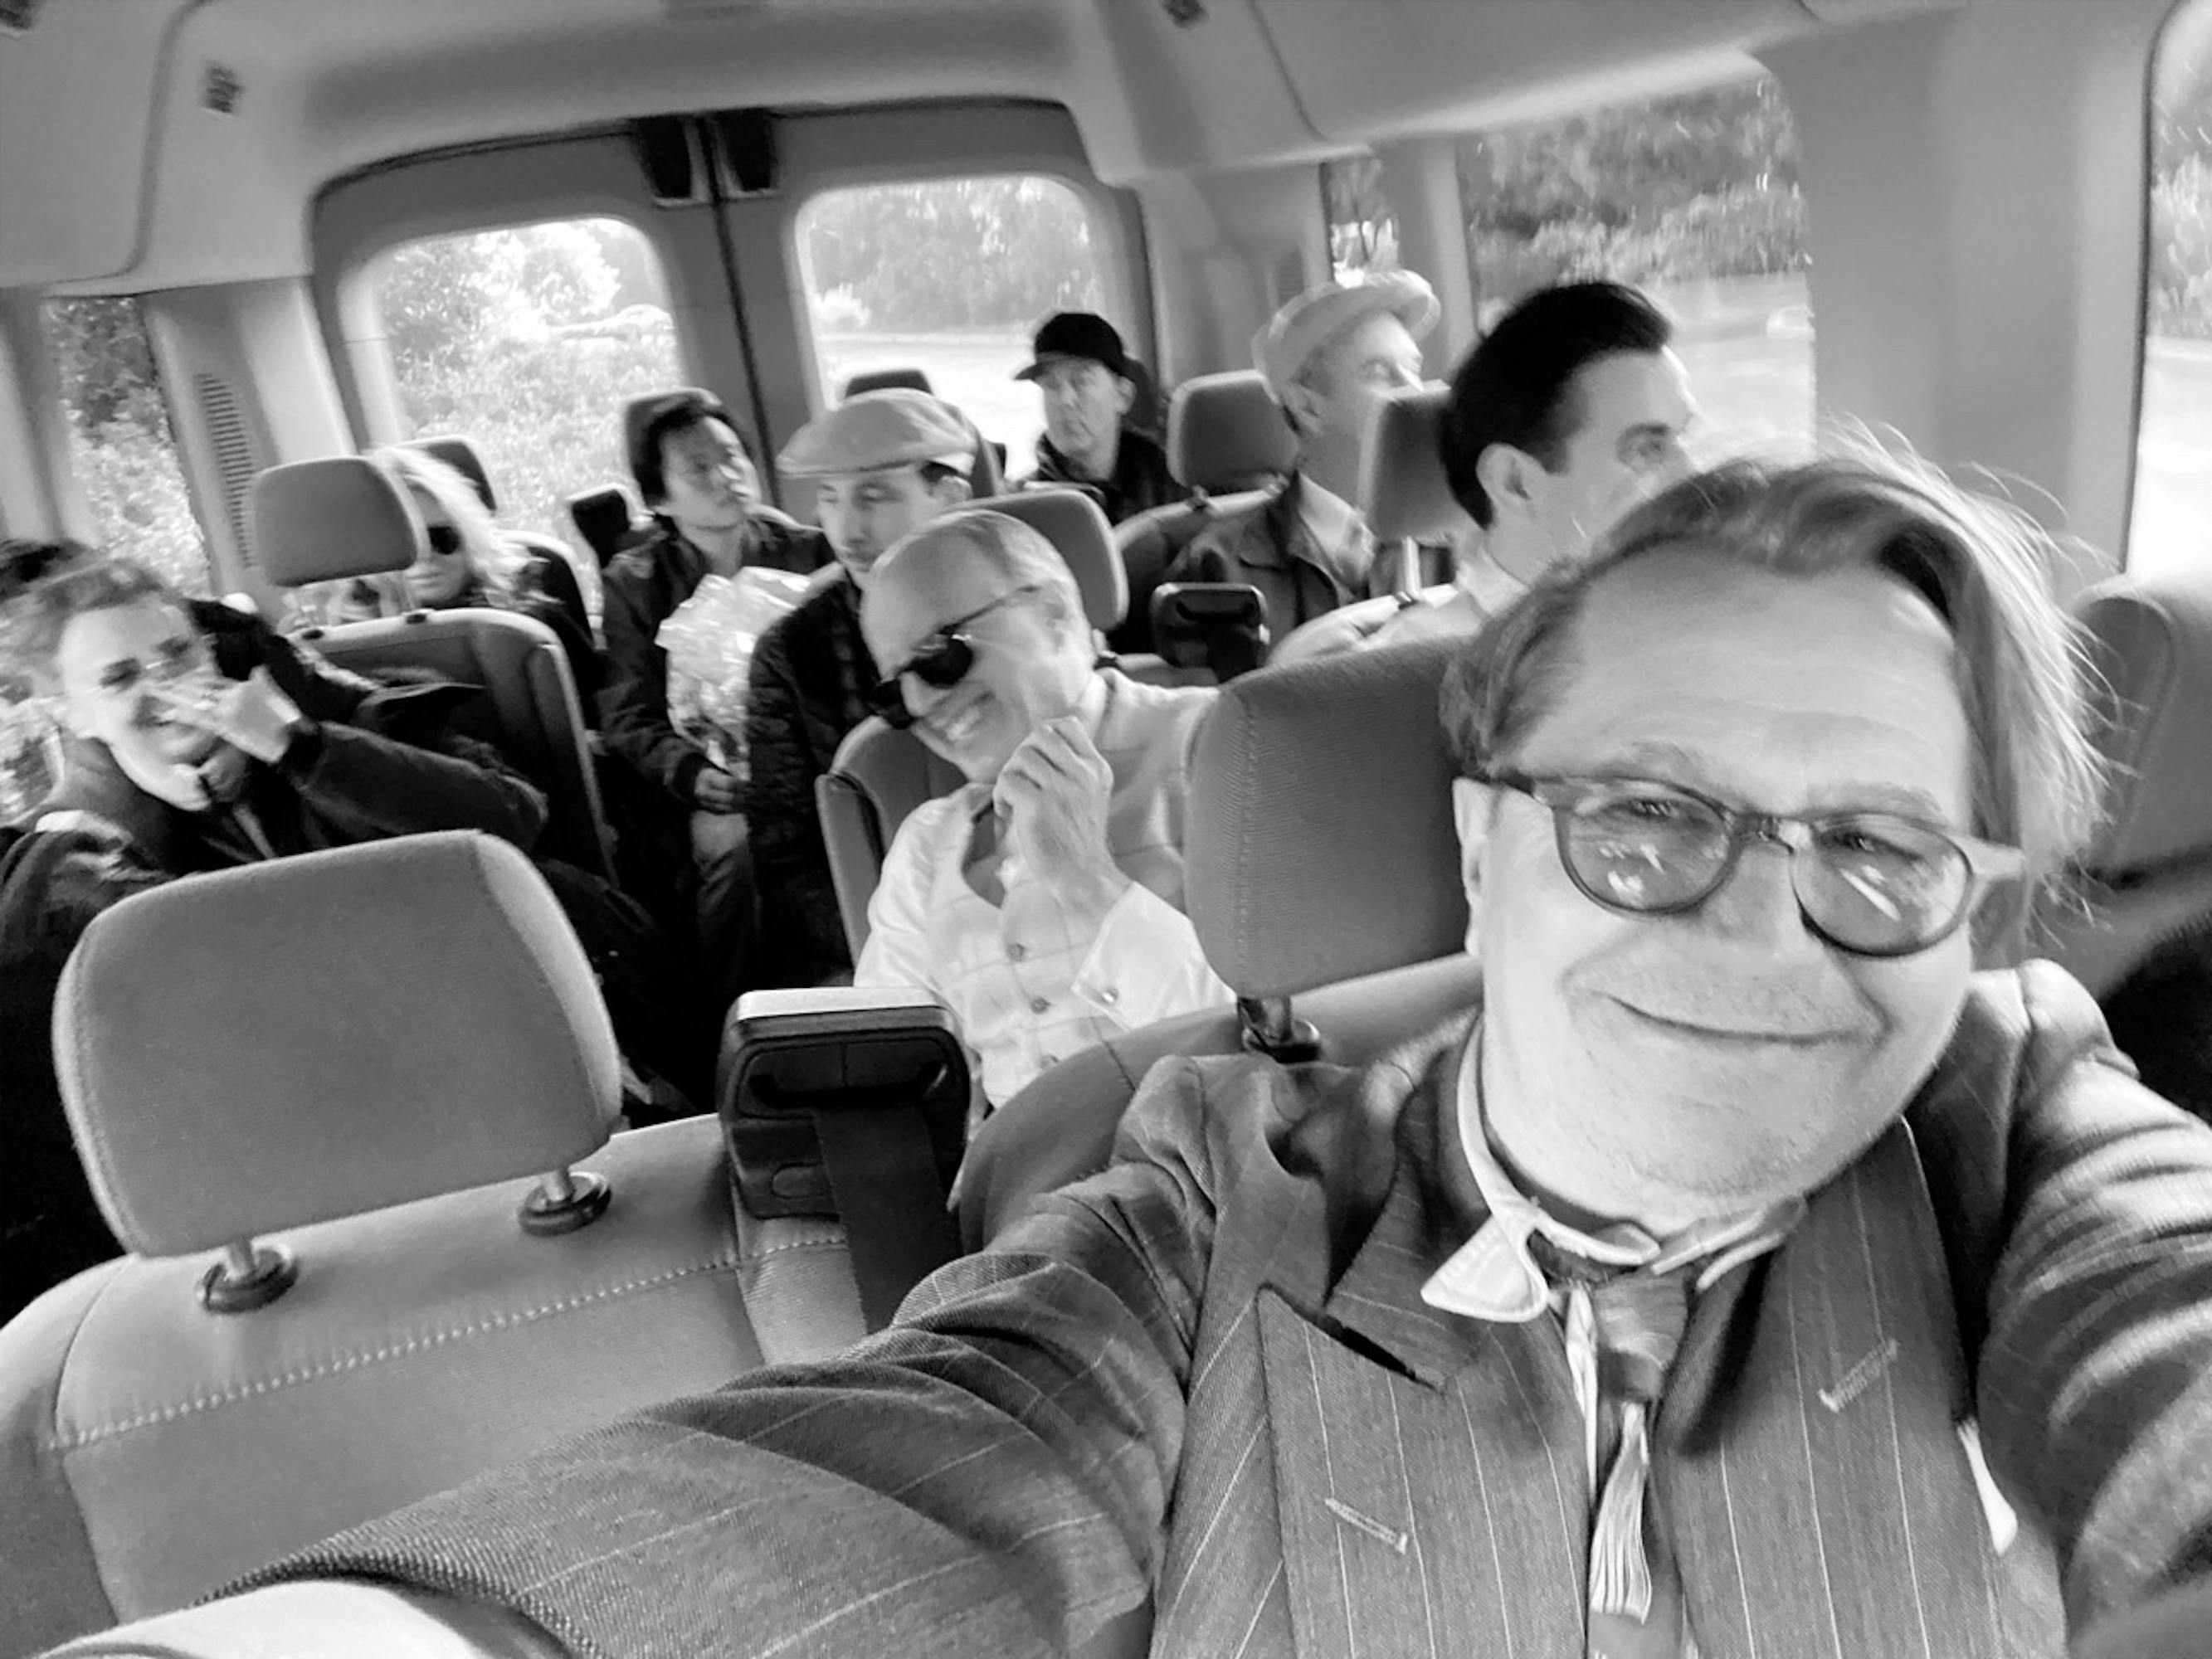 Oldman takes a smiling selfie in a van, with cast and crew enjoying themselves in the background.